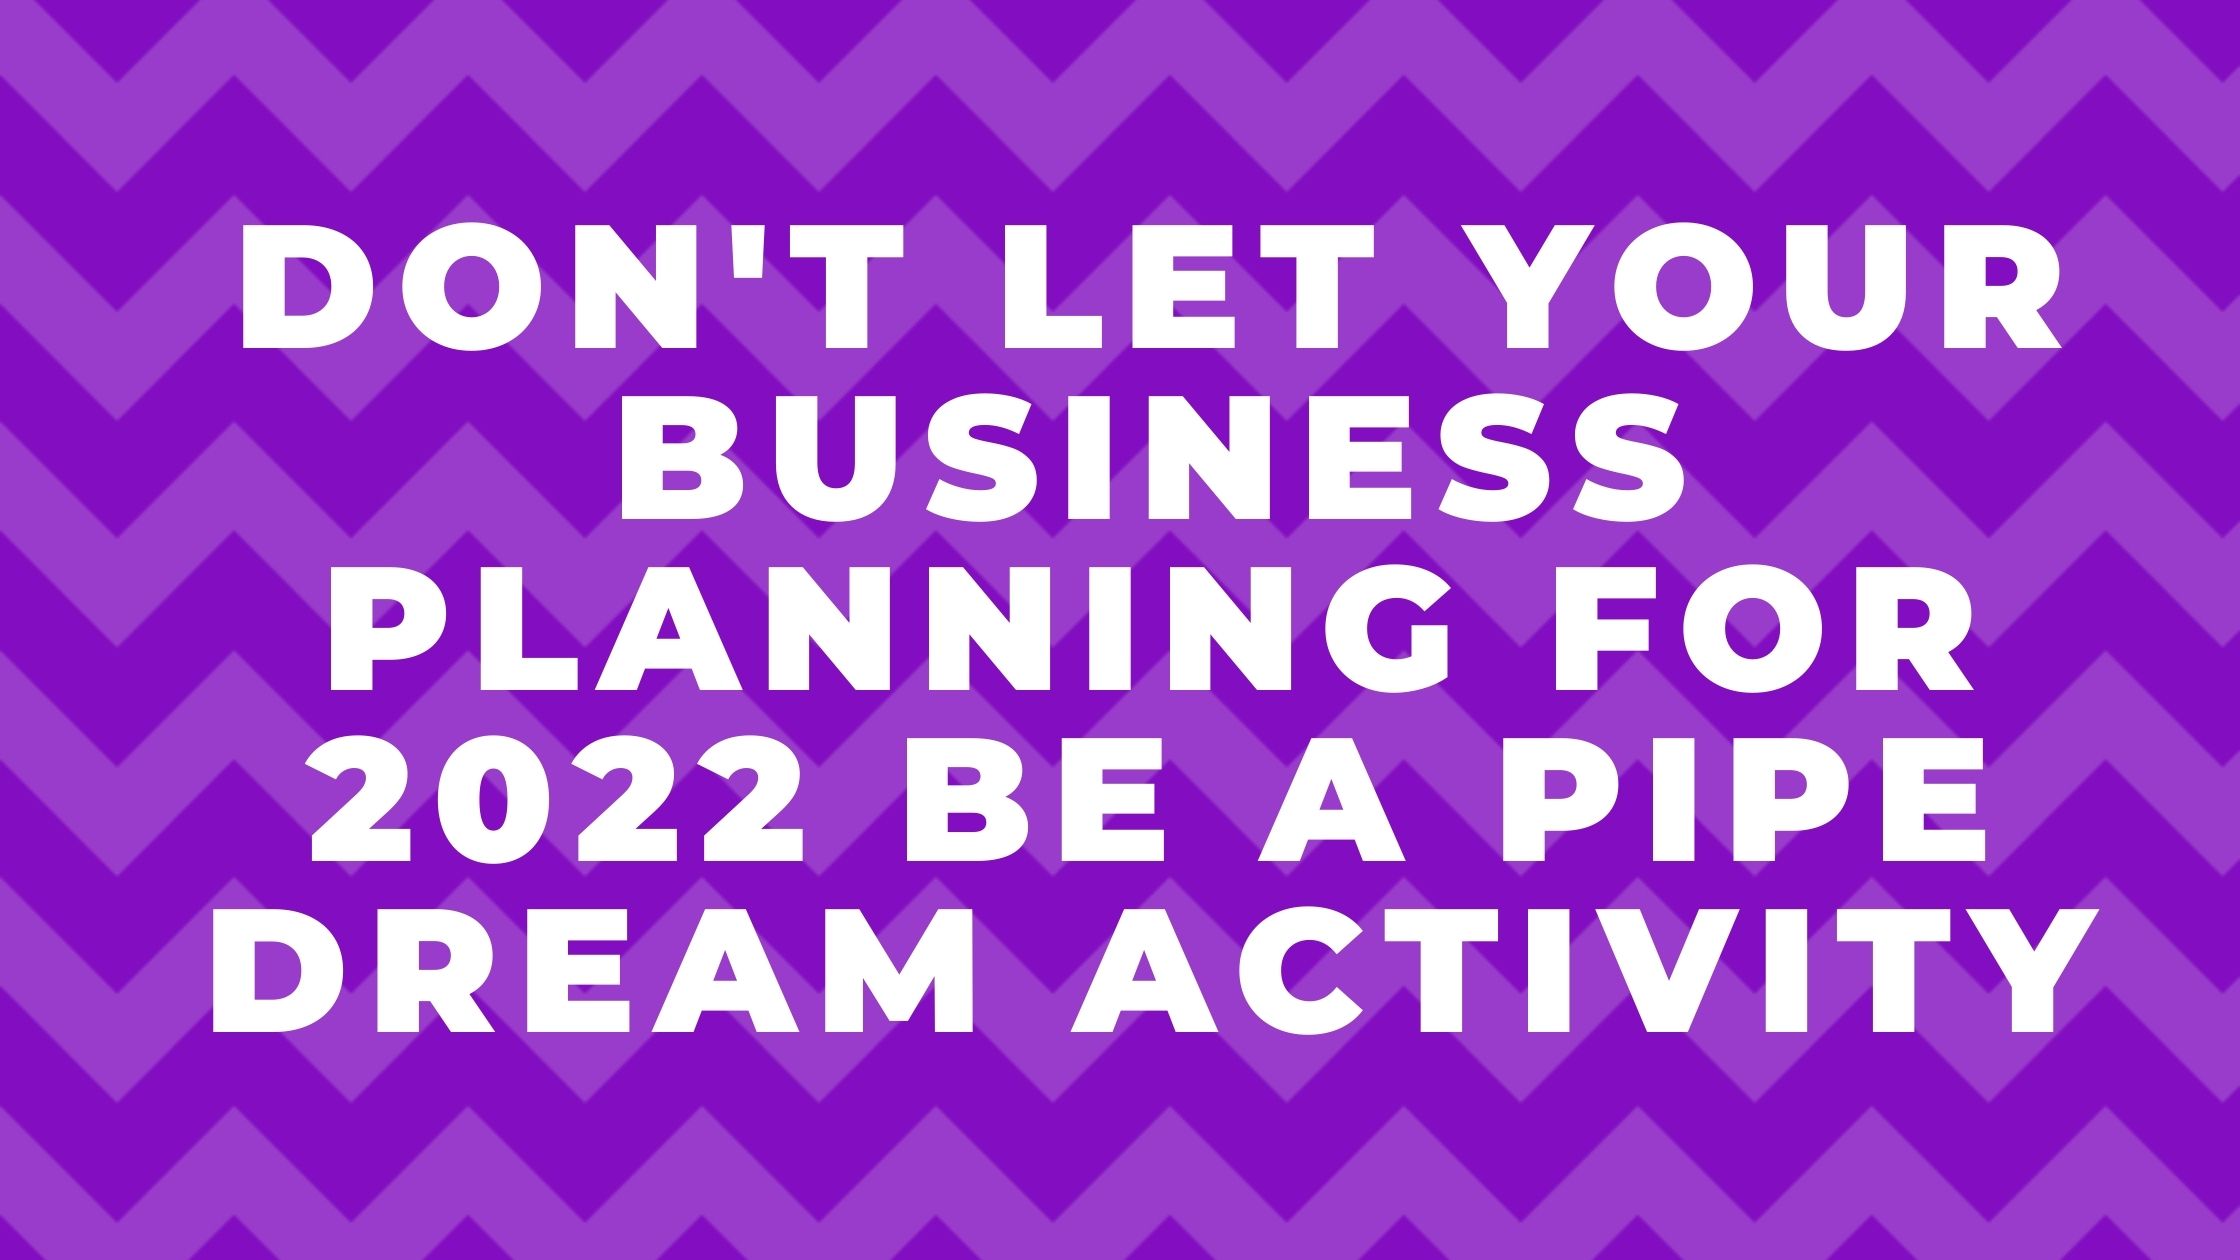 Time to strat planning for your business growth in 2022